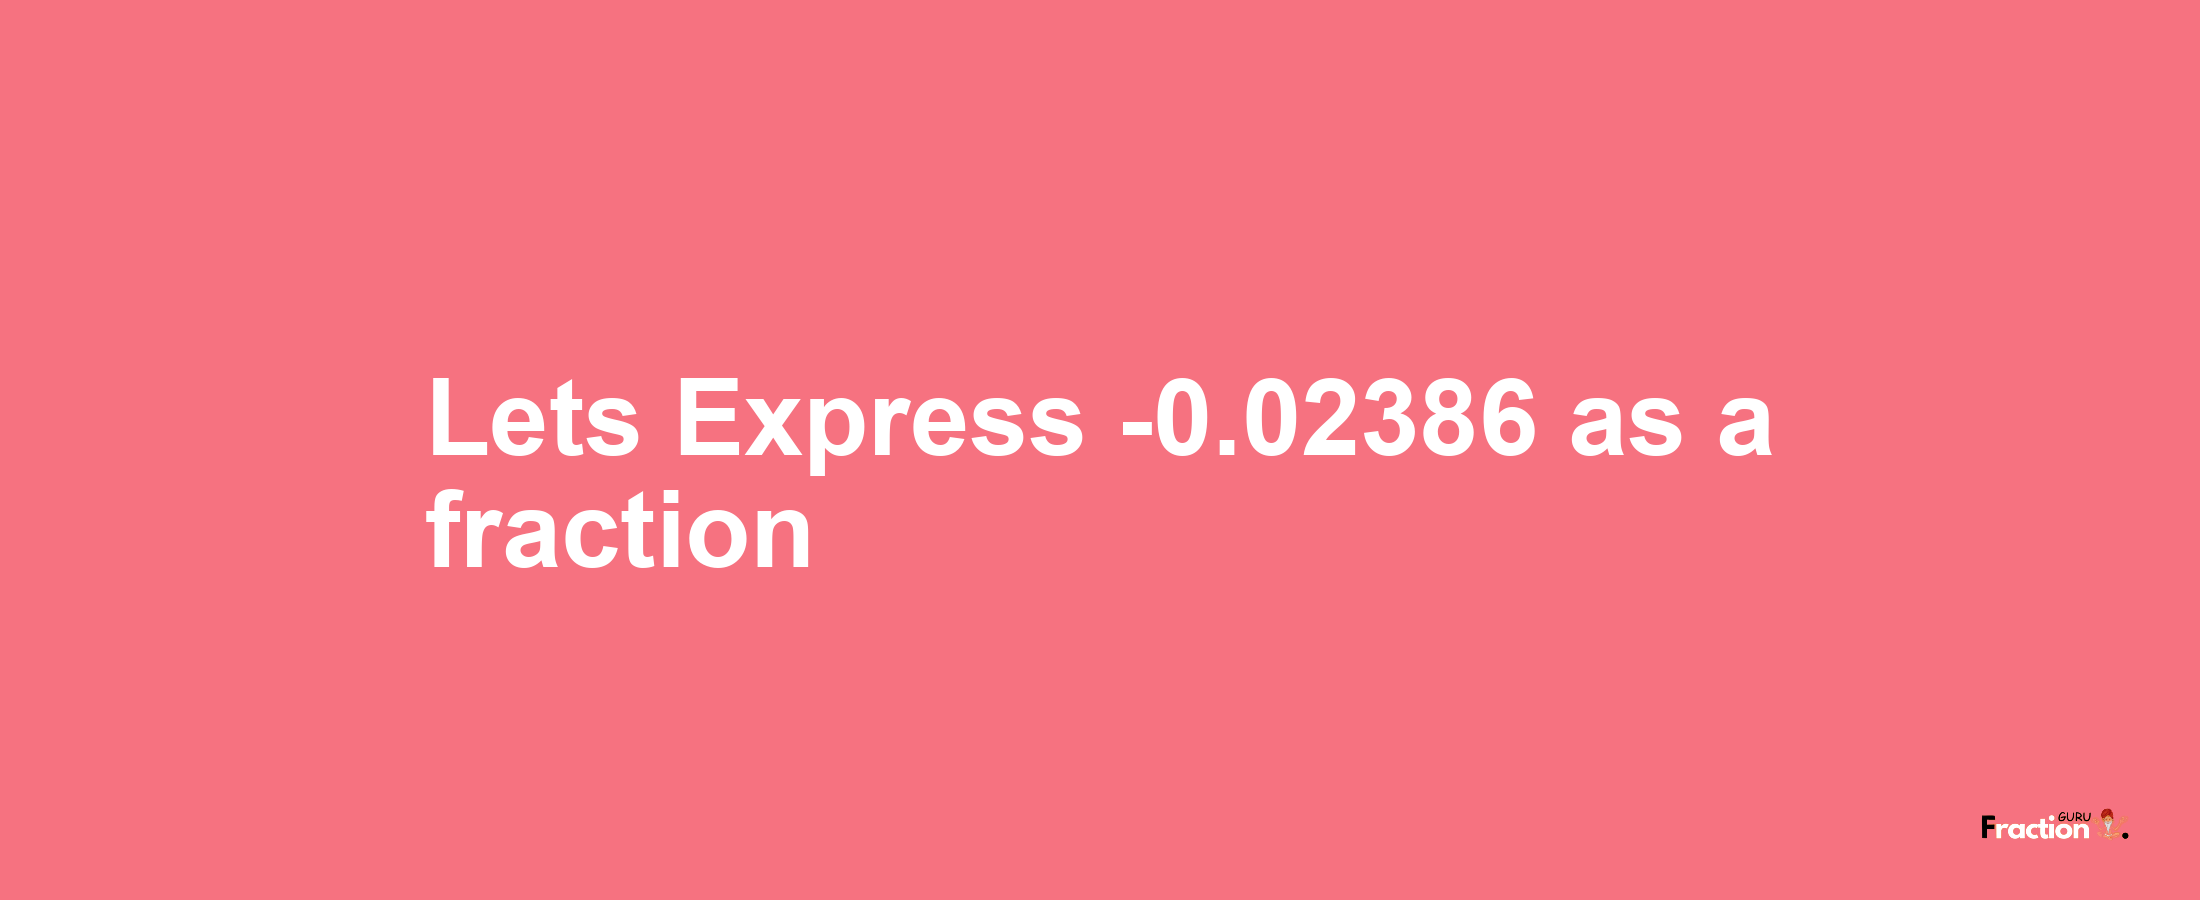 Lets Express -0.02386 as afraction